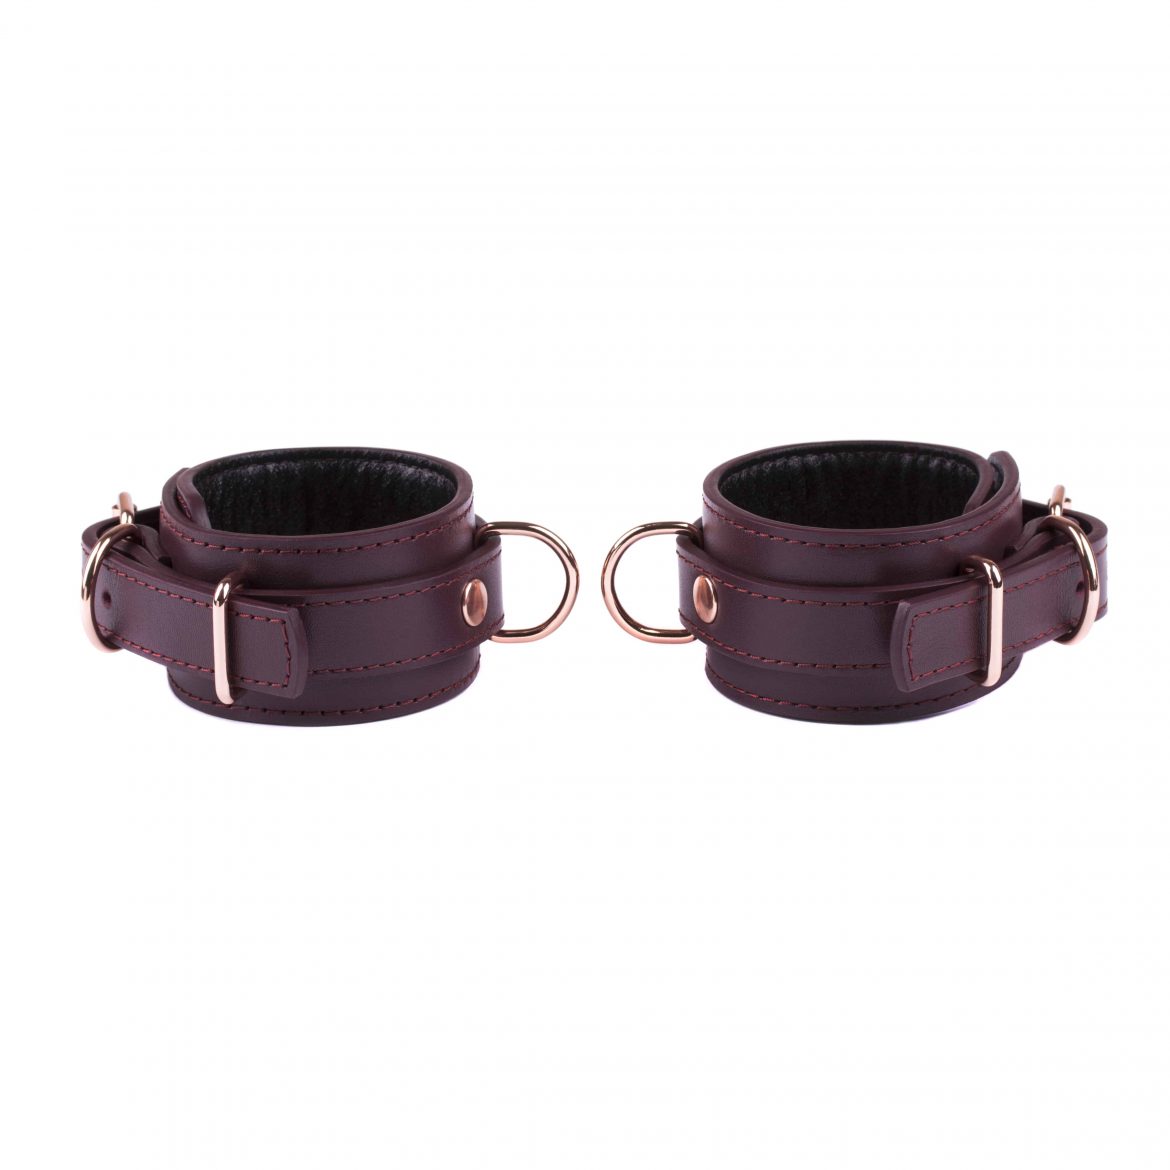 bdsm leather bondage set collar leash handcuffs pair of double fixation21 scaled